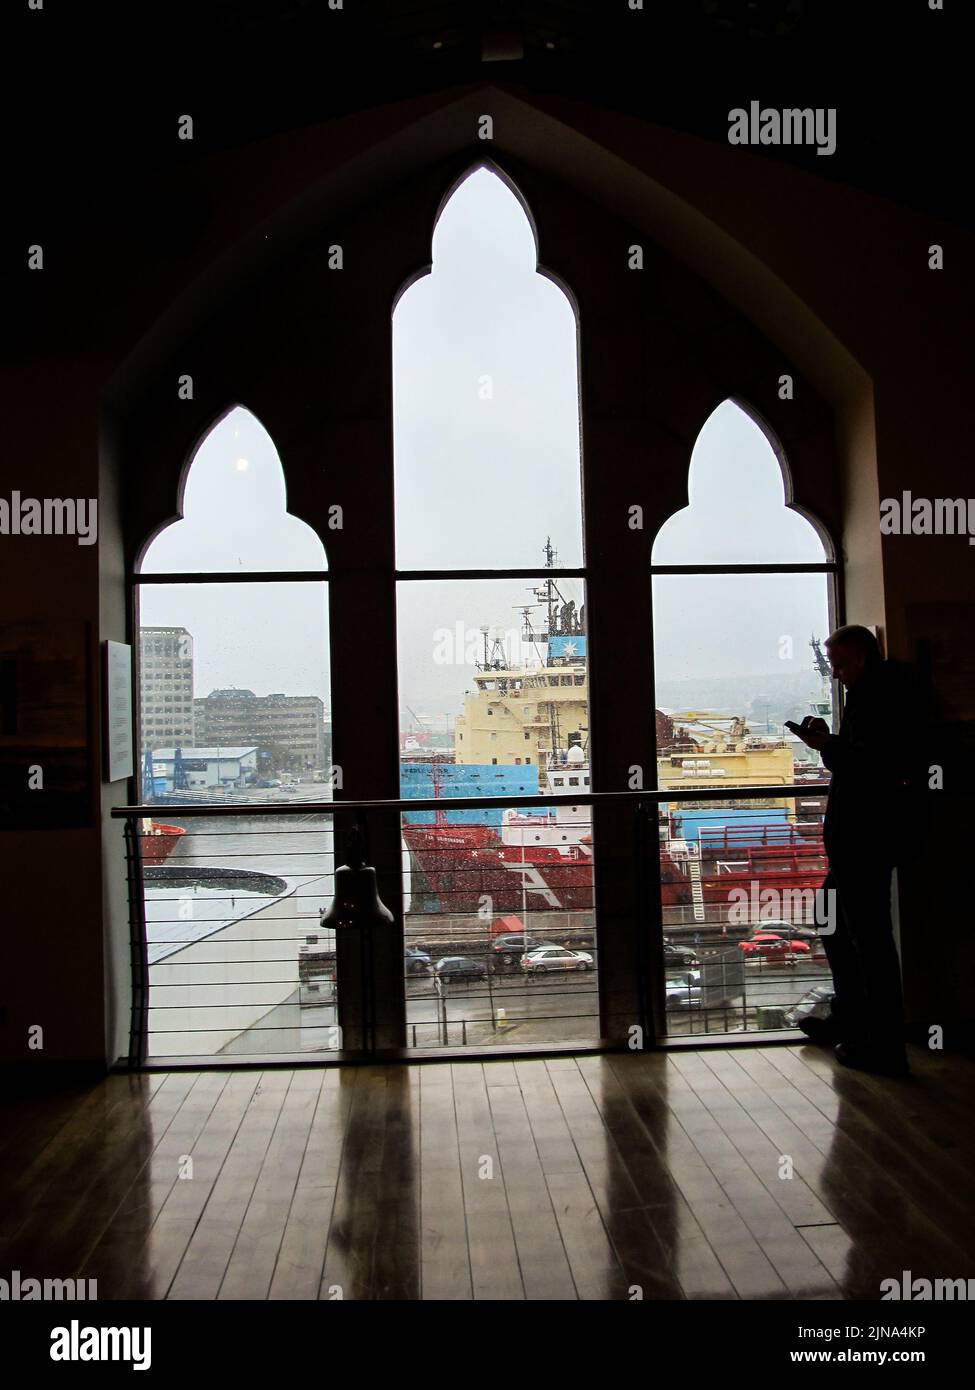 Looking through a window at the ships in Aberdeen Harbor, Scotland, on a cold rainy day Stock Photo